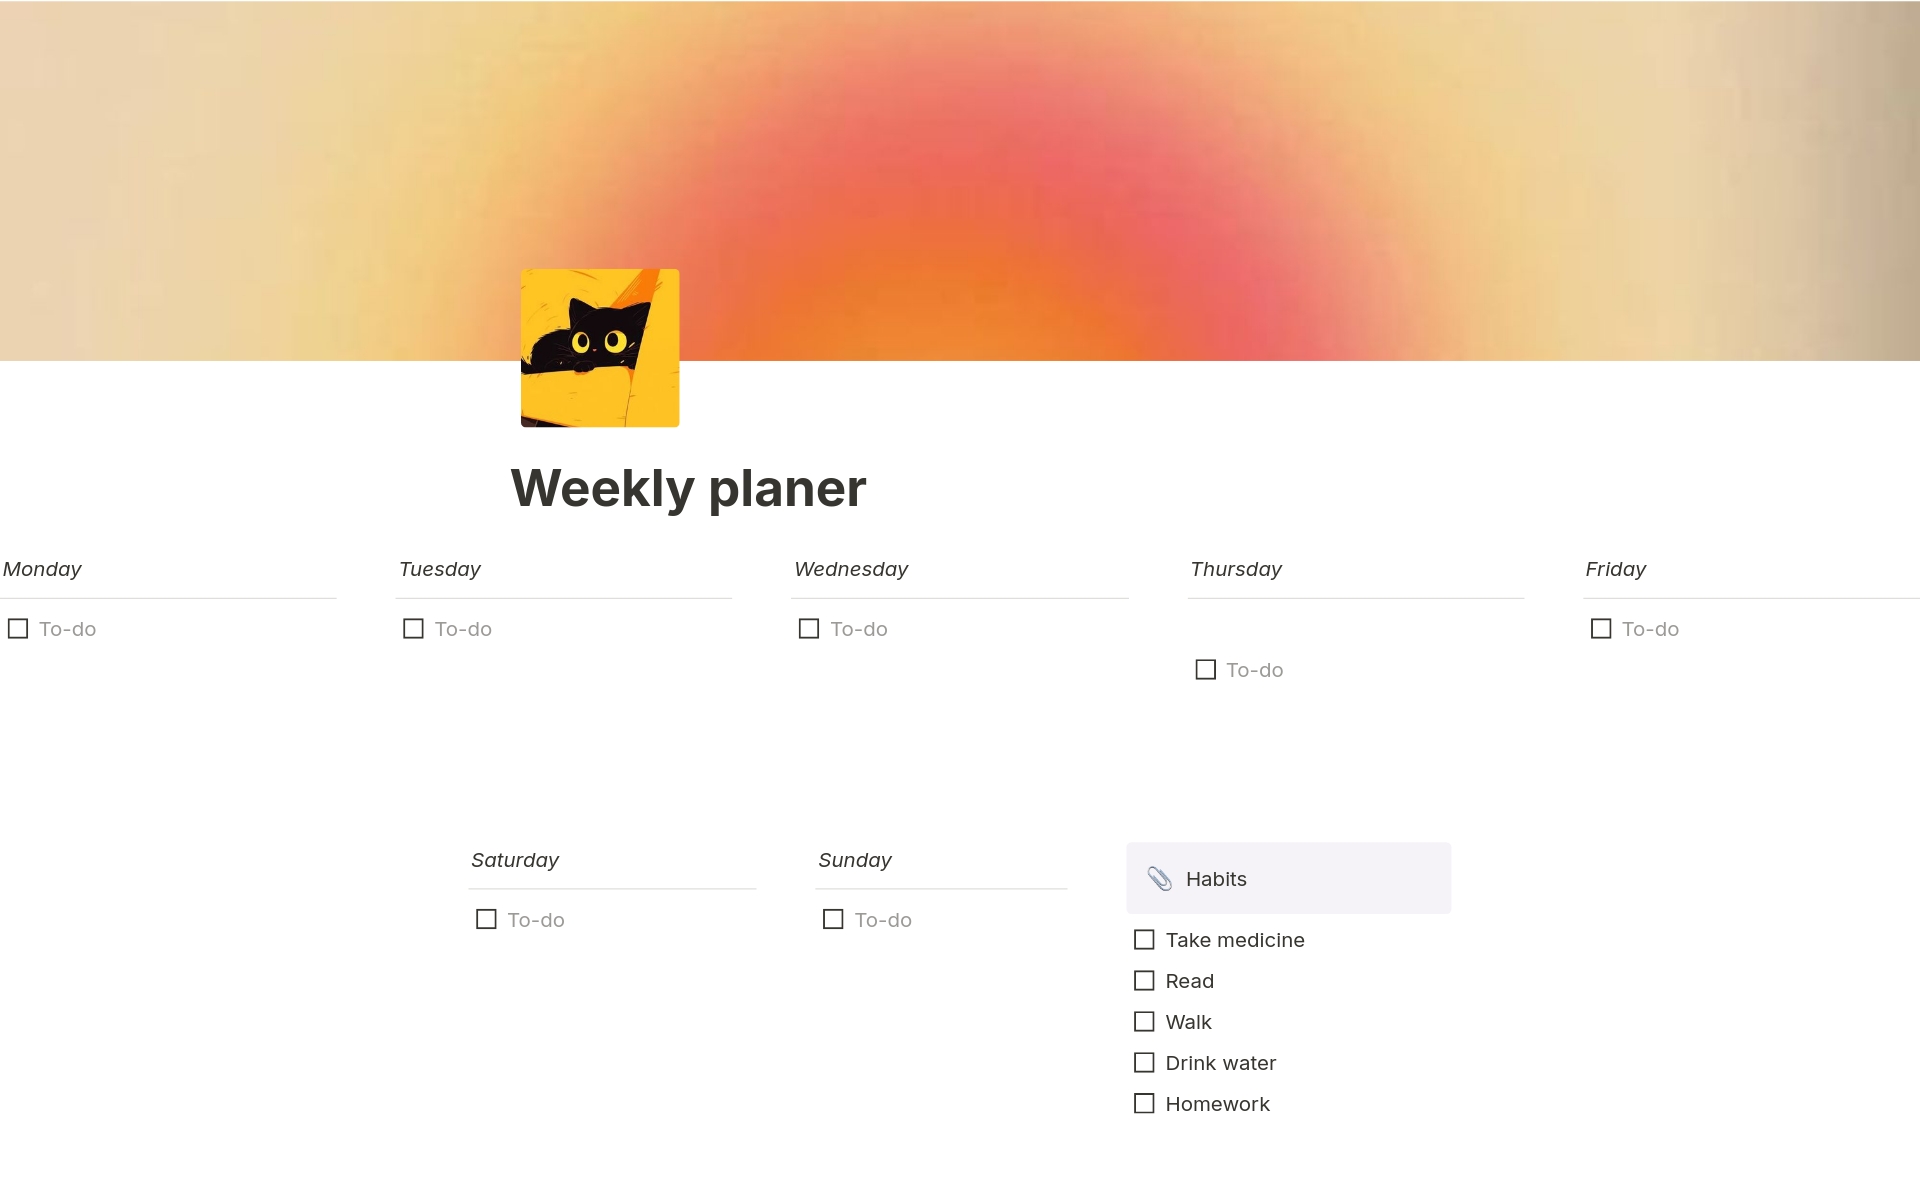 Weekly planer